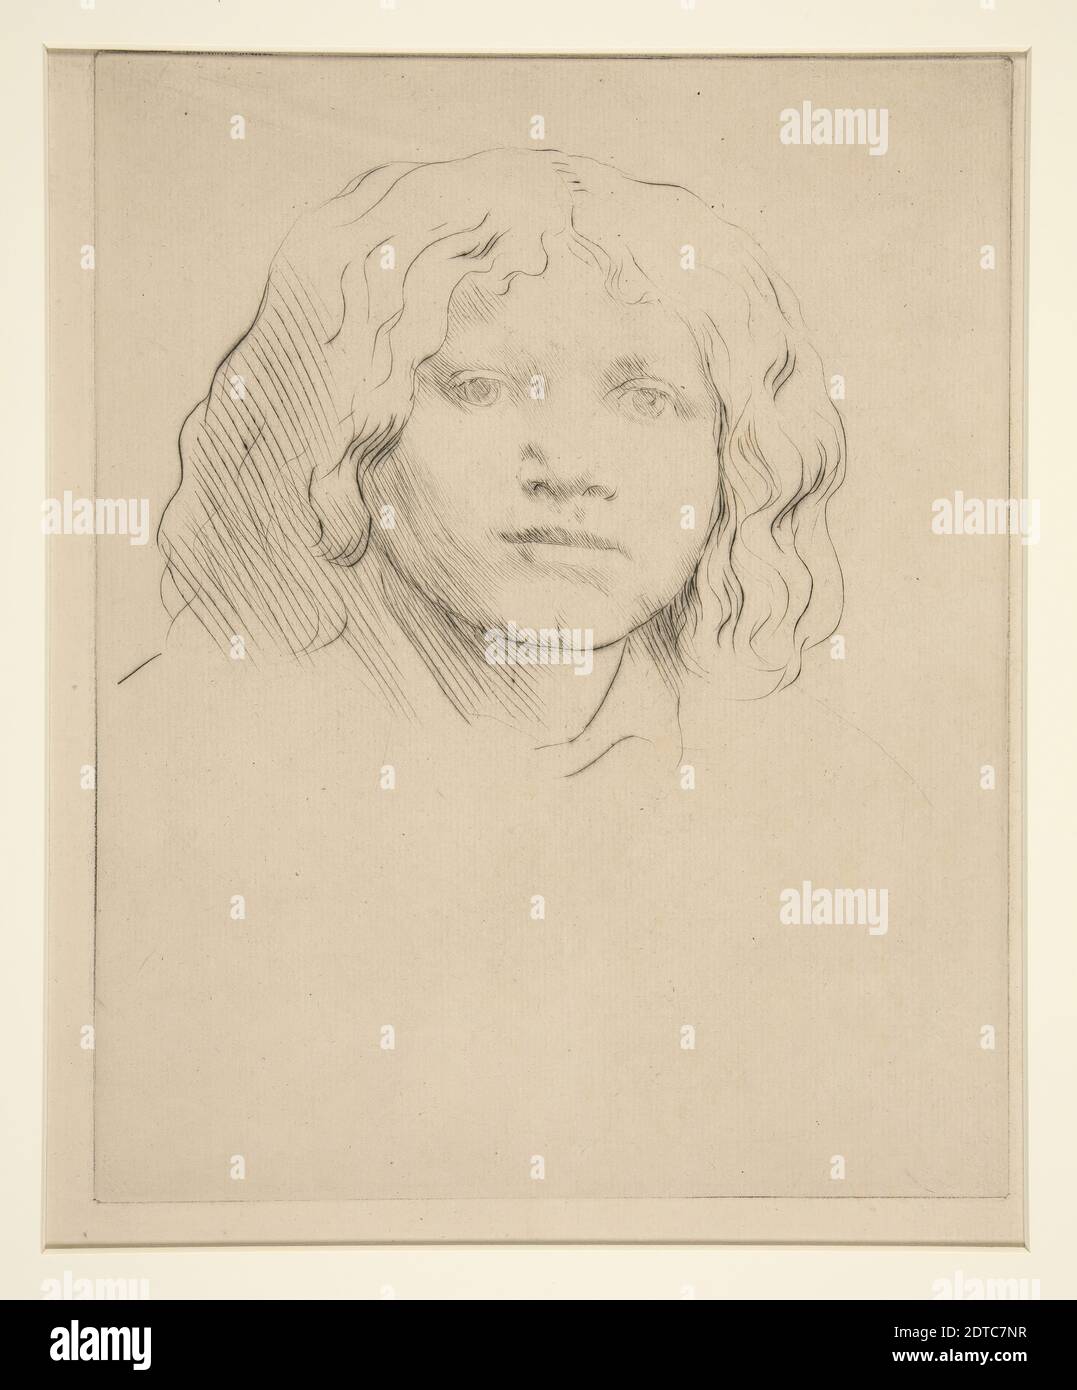 Artist: Alphonse Legros, French, 1837–1911, Tete d’Enfant Italien (Head of Italian Child), Drypoint and etching, platemark: 25 × 20 cm (9 13/16 × 7 7/8 in.), French, 19th century, Works on Paper - Prints Stock Photo